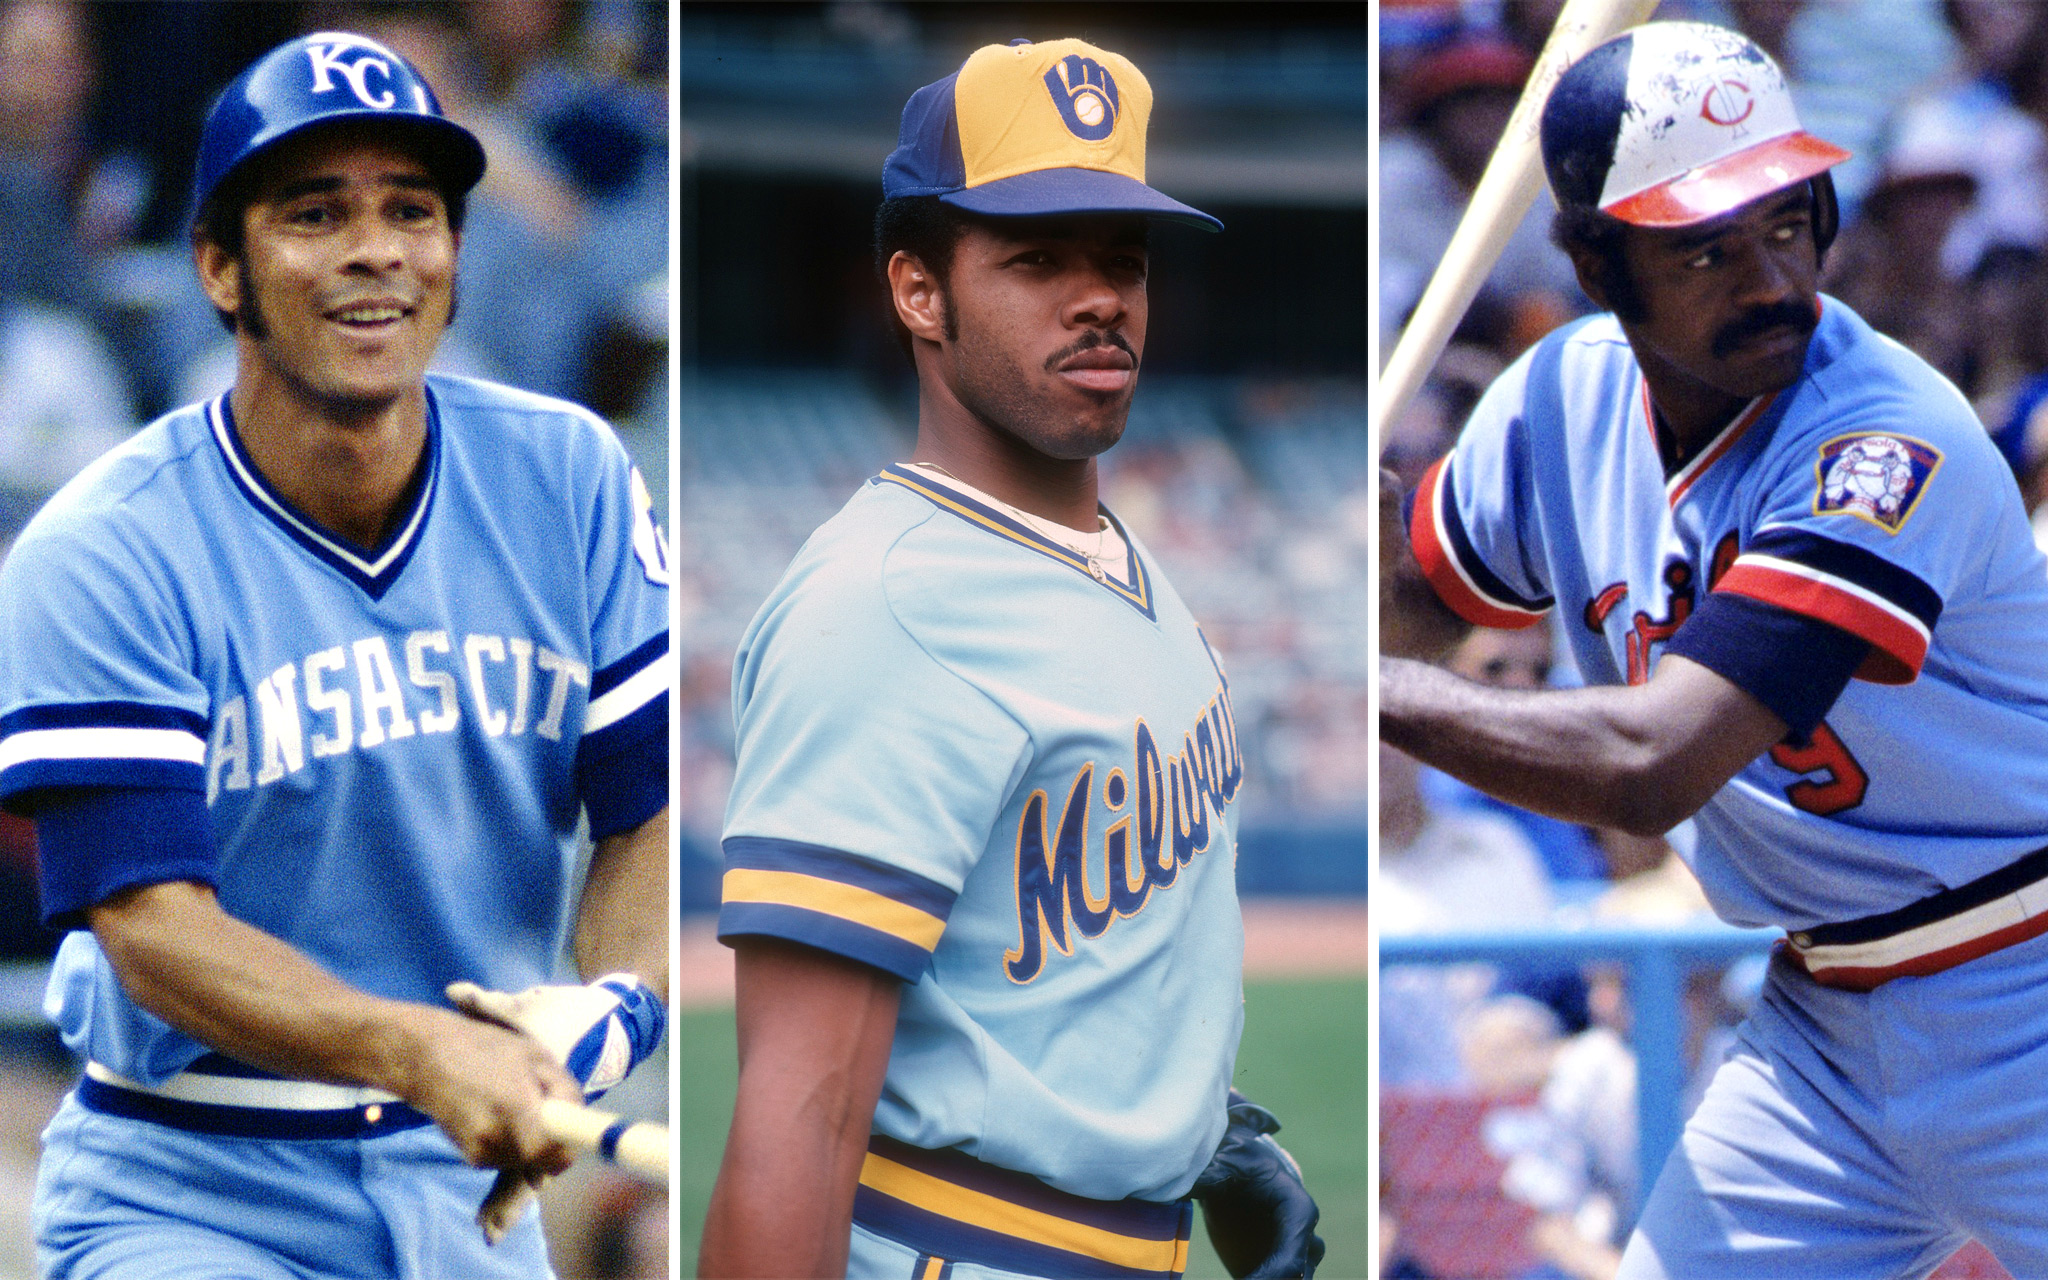 Best baseball uniforms? Cardinals perched in first – The Denver Post